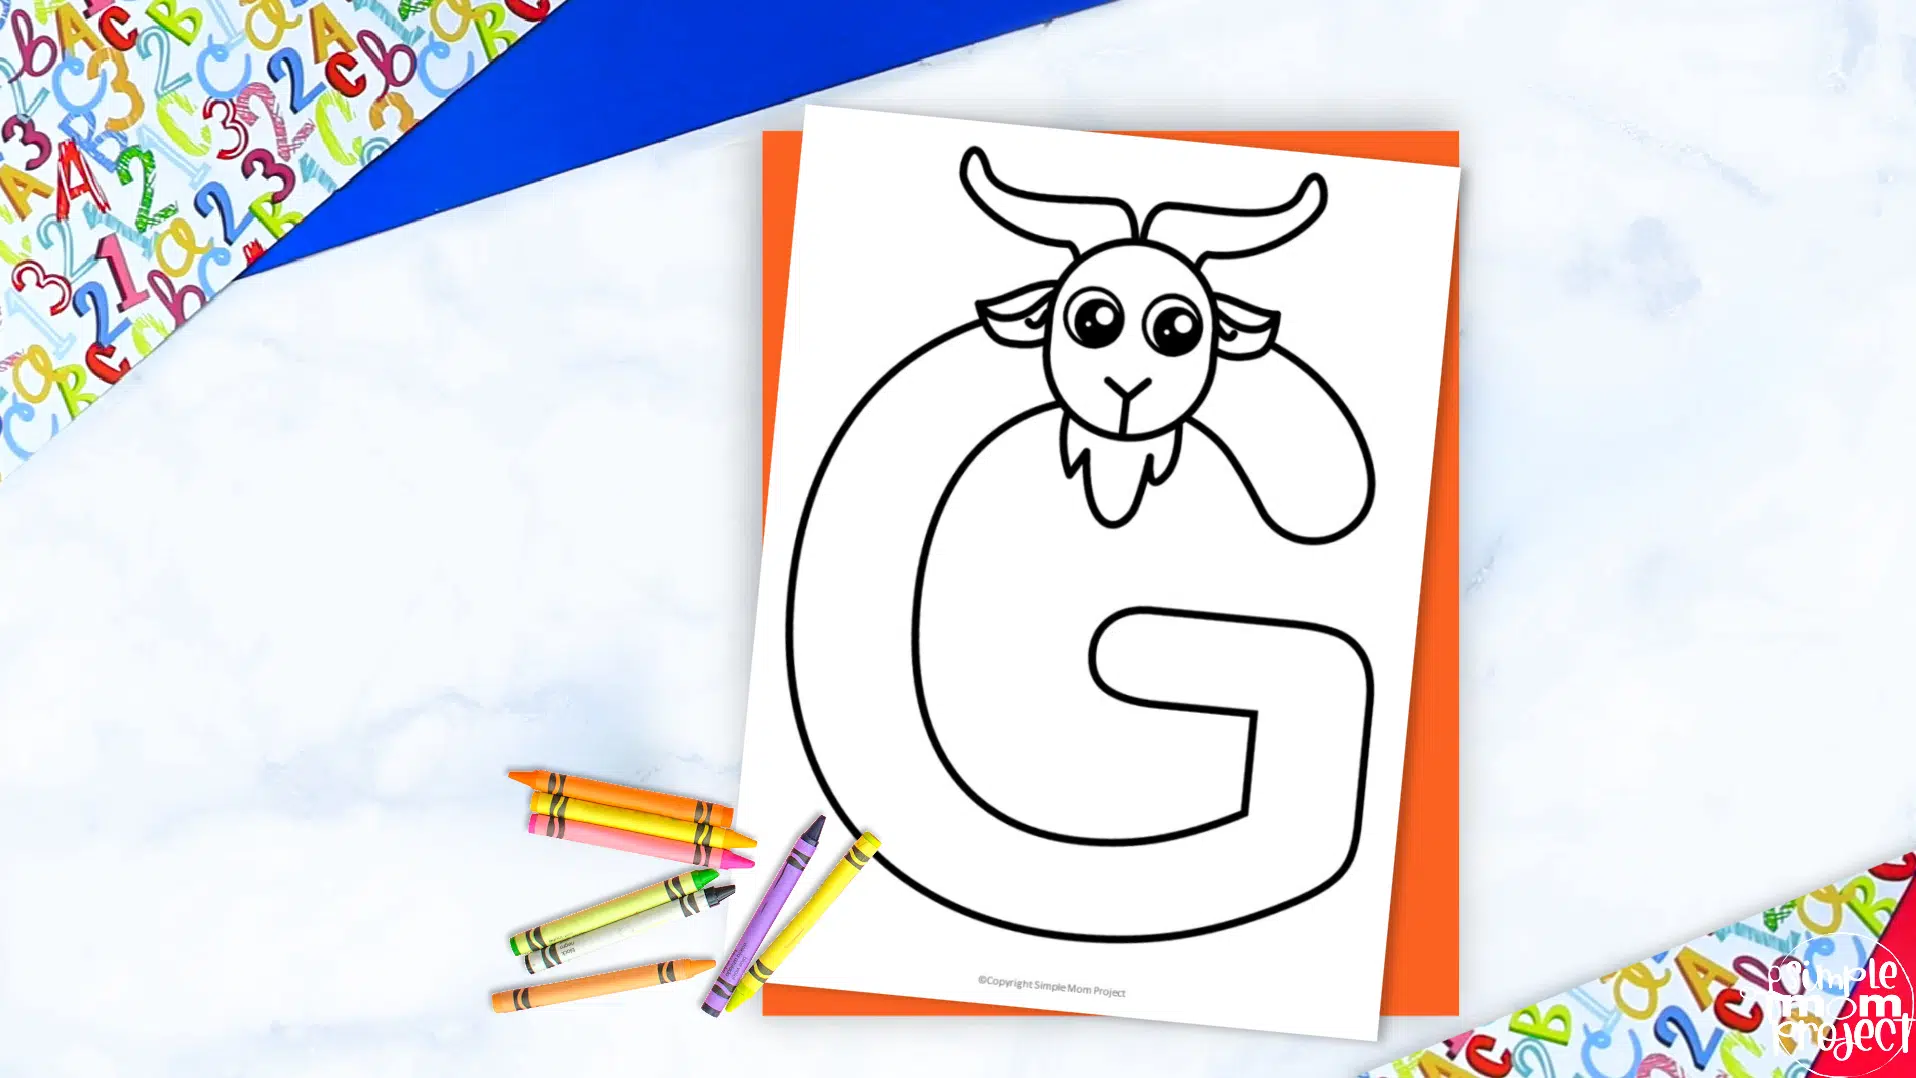 Fun printable alphabet coloring pages â simple mom project